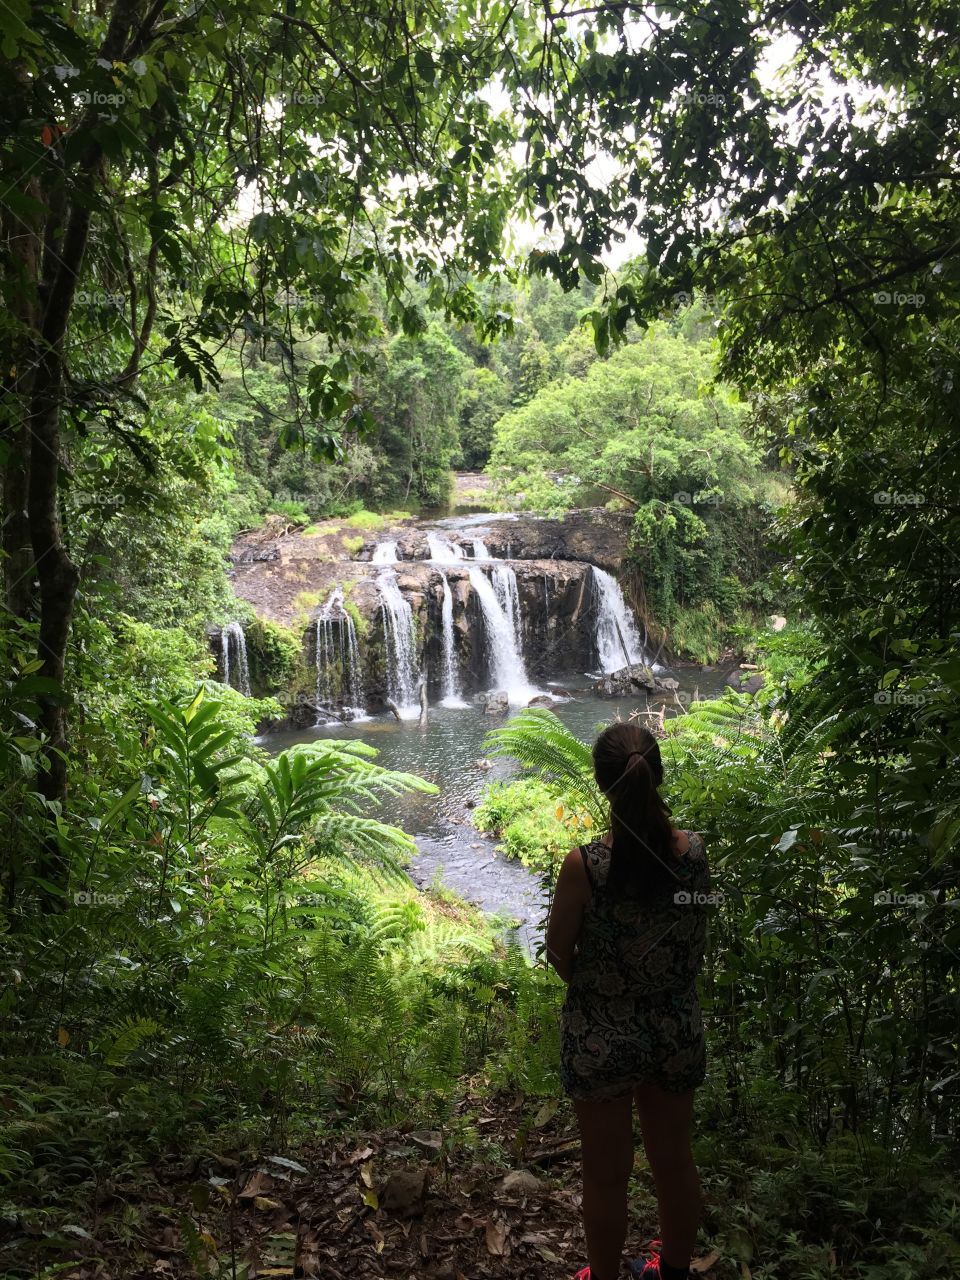 North Queensland is littered with many impressive waterfalls. Wooroonooran has 3 of my favourites